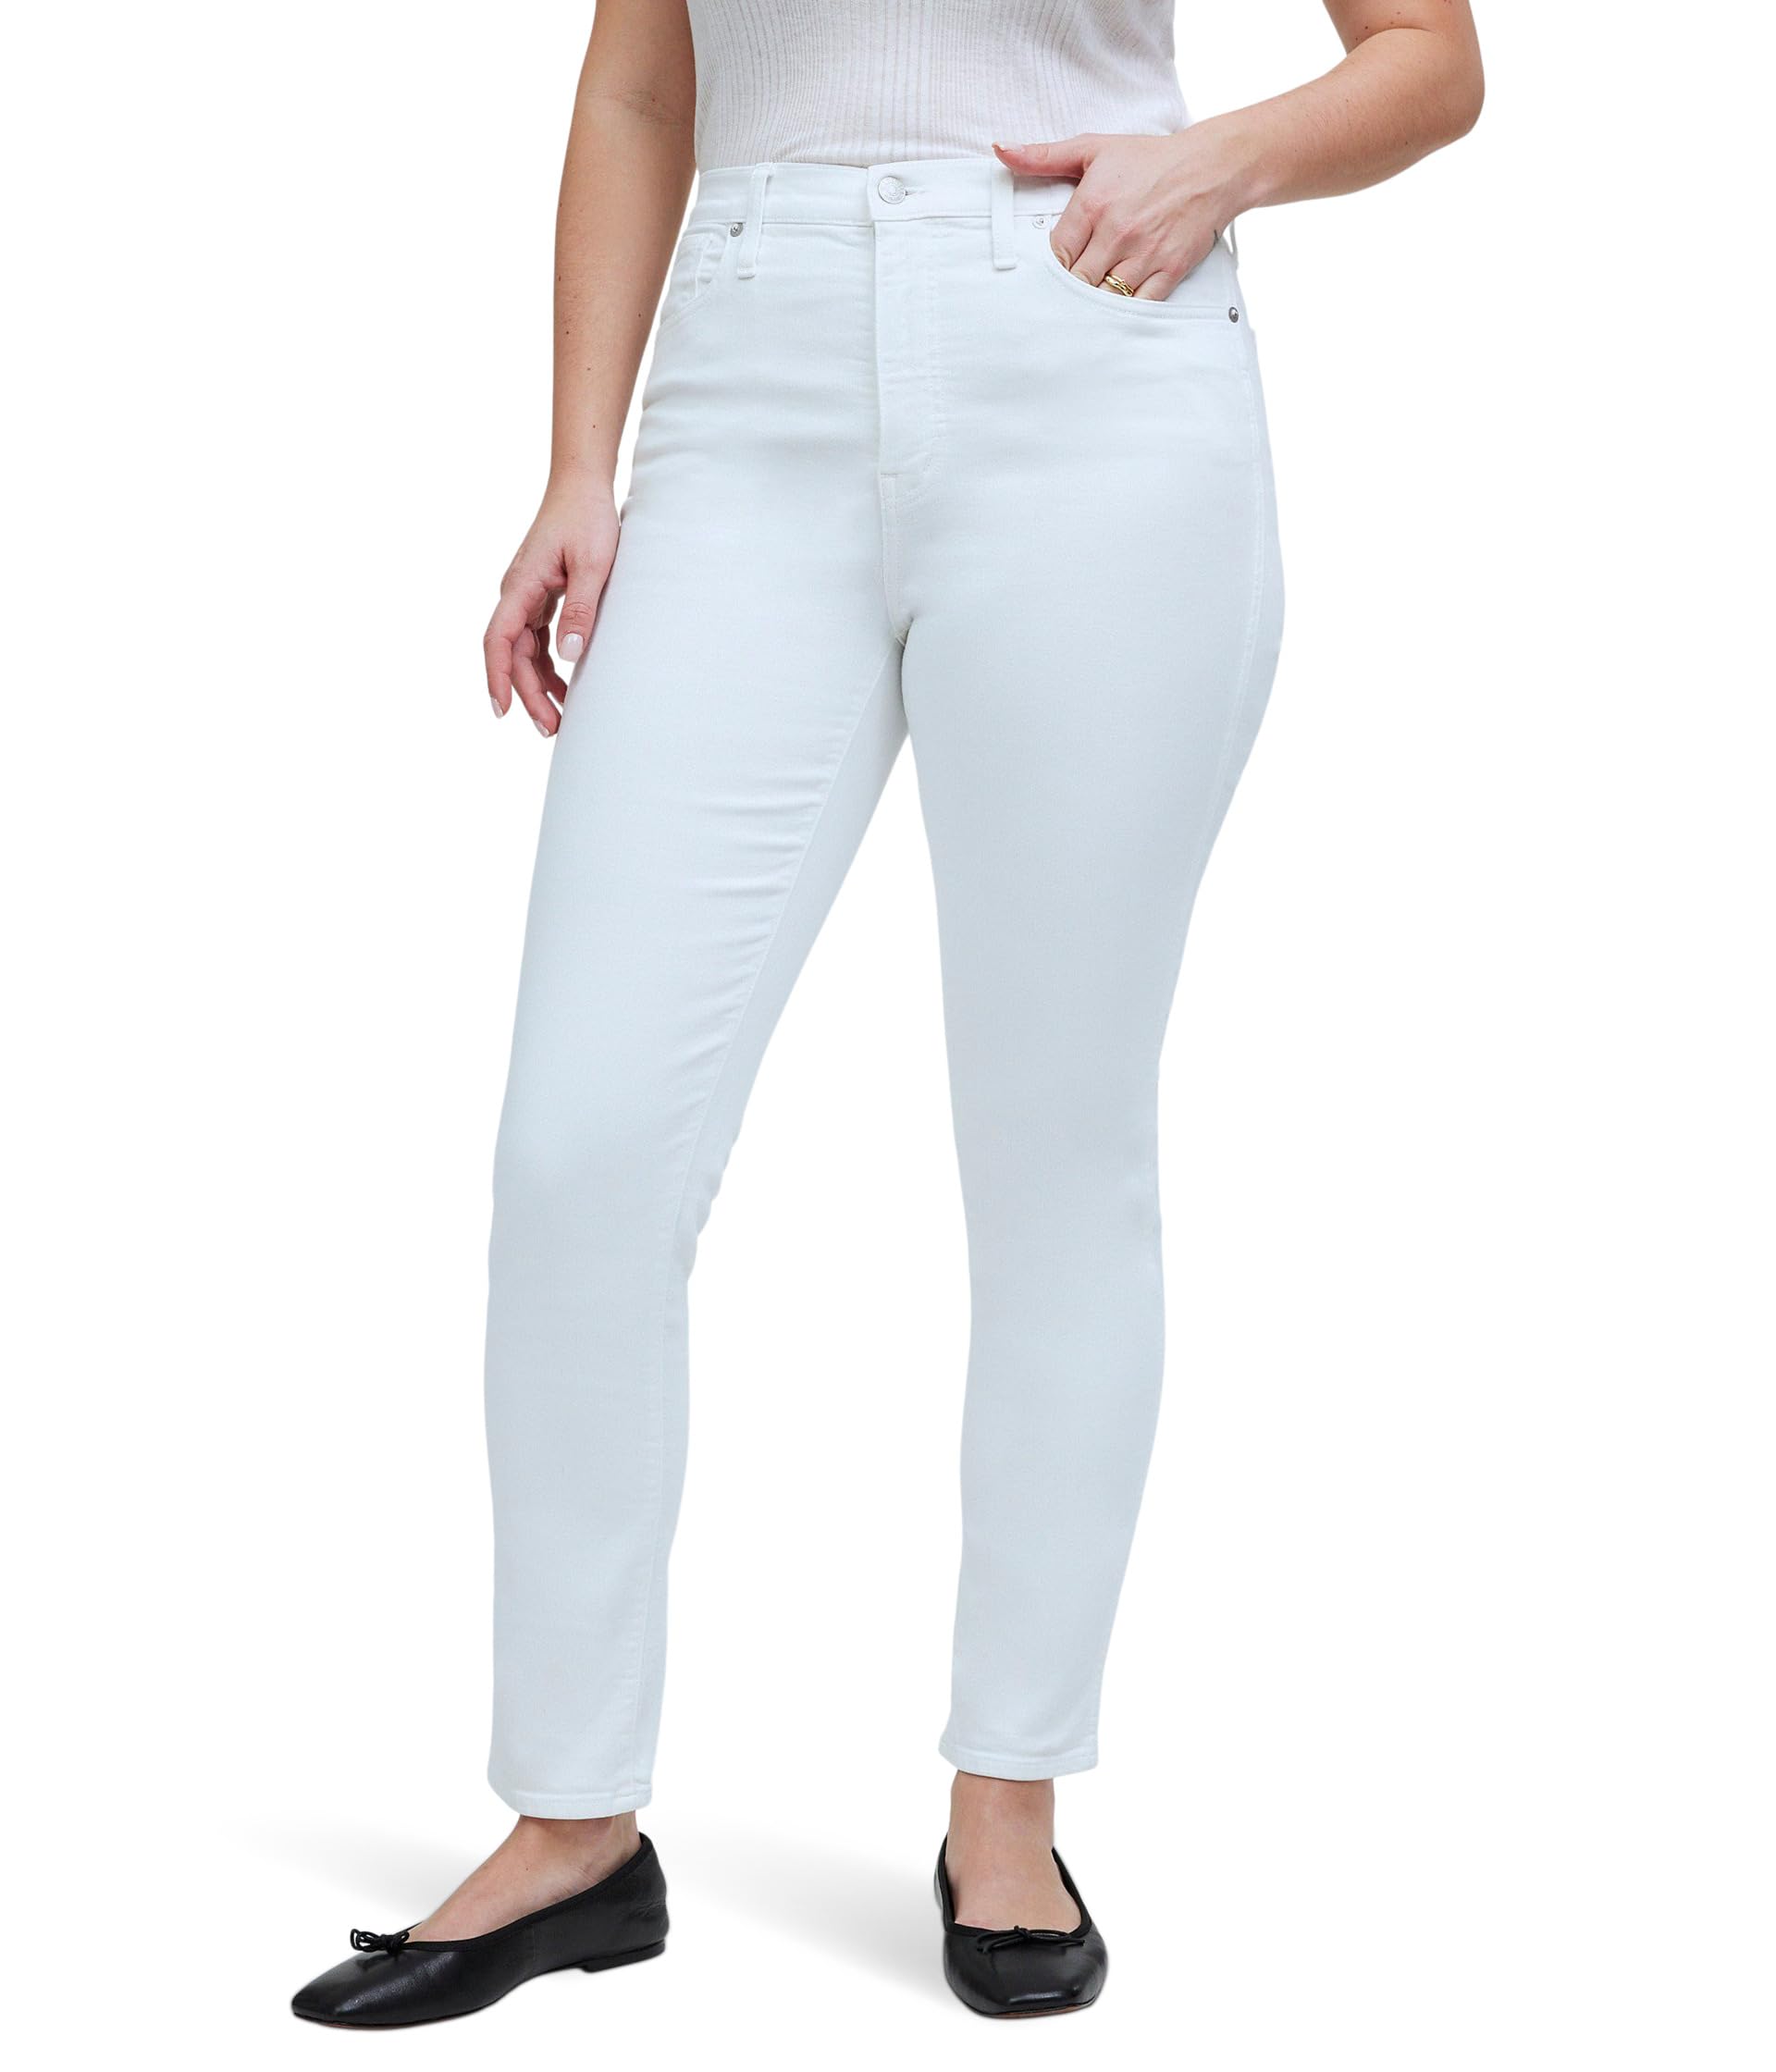 High-Rise Stovepipe Jeans in Pure White Madewell